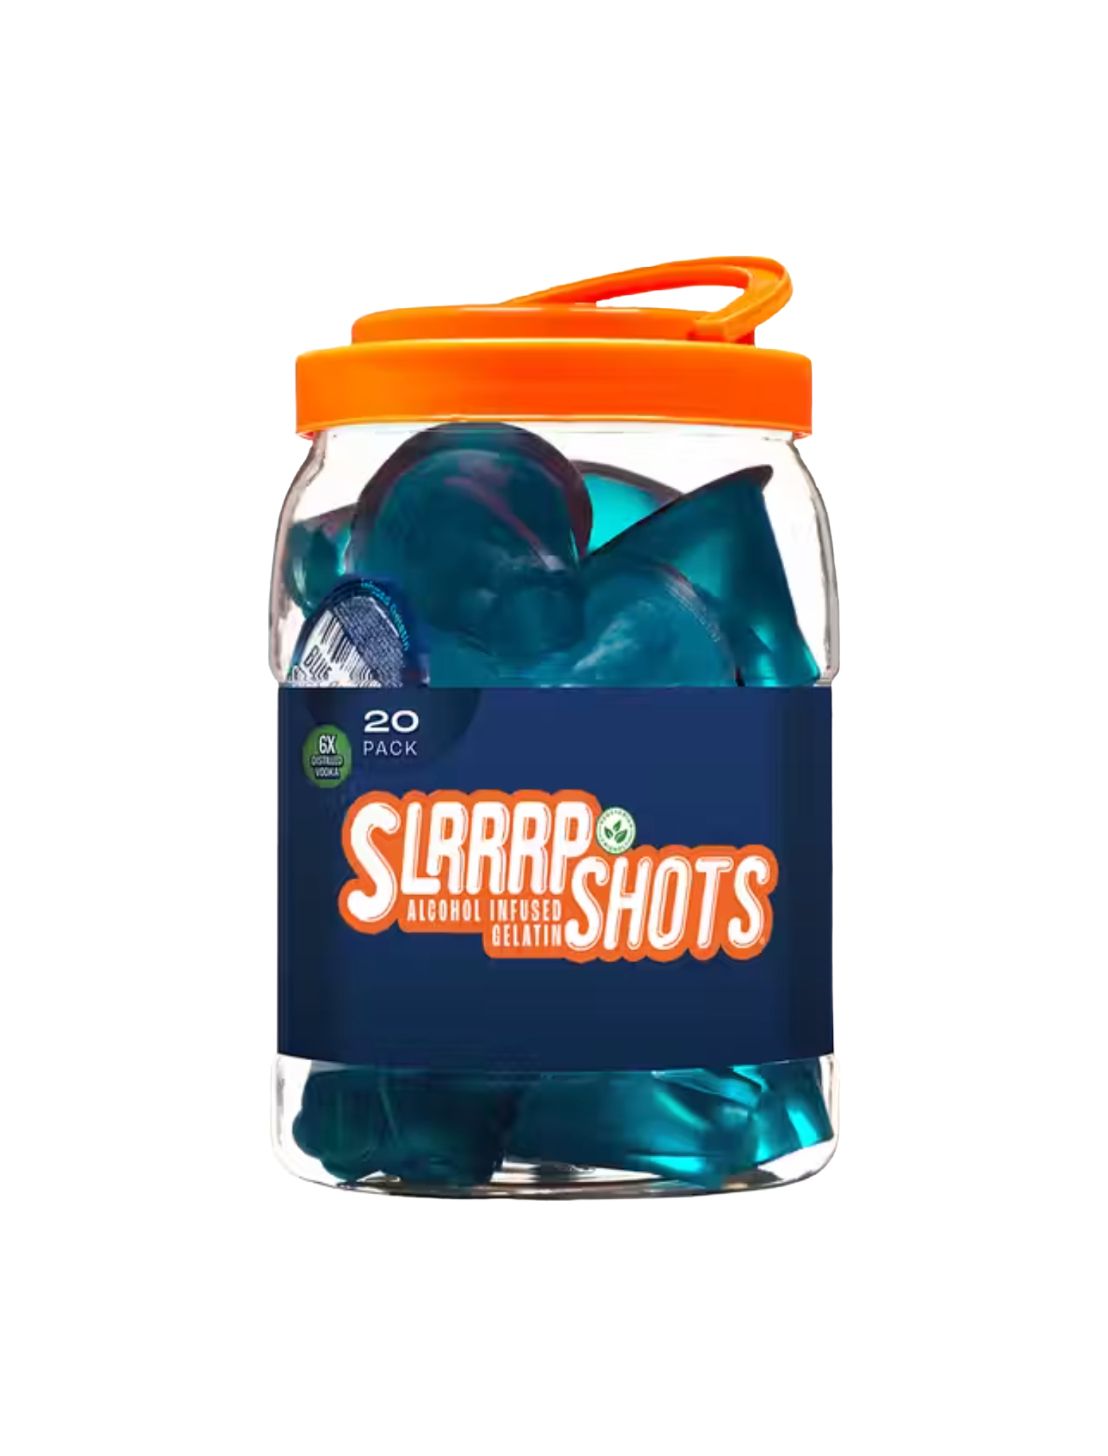 Container of Blue Raspberry Smash SLRRRP with orange lid in front of a plain white background